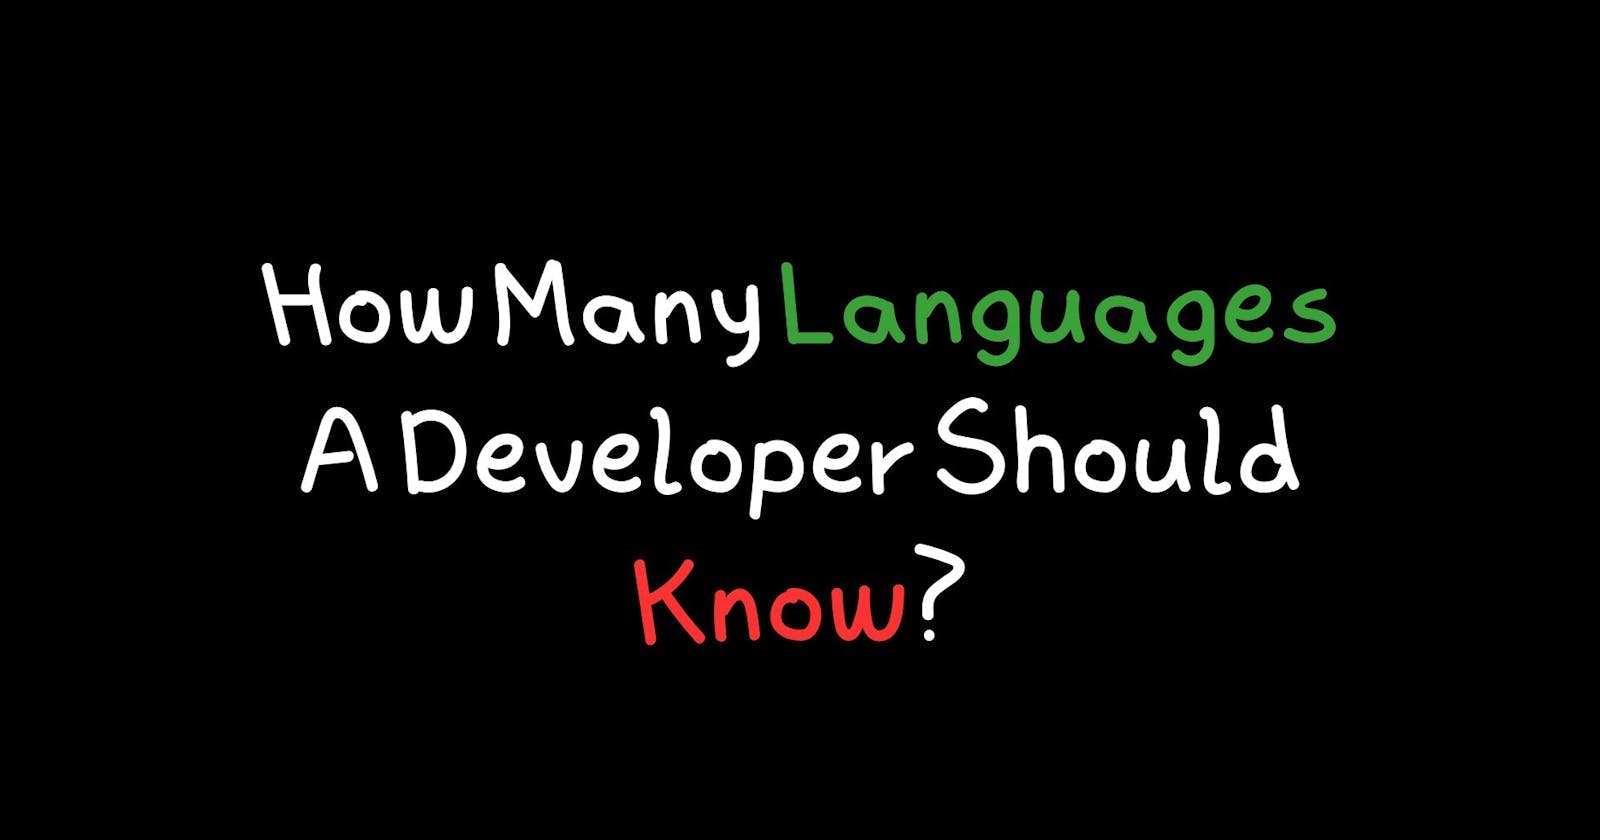 How Many Languages A Developer Should Know?